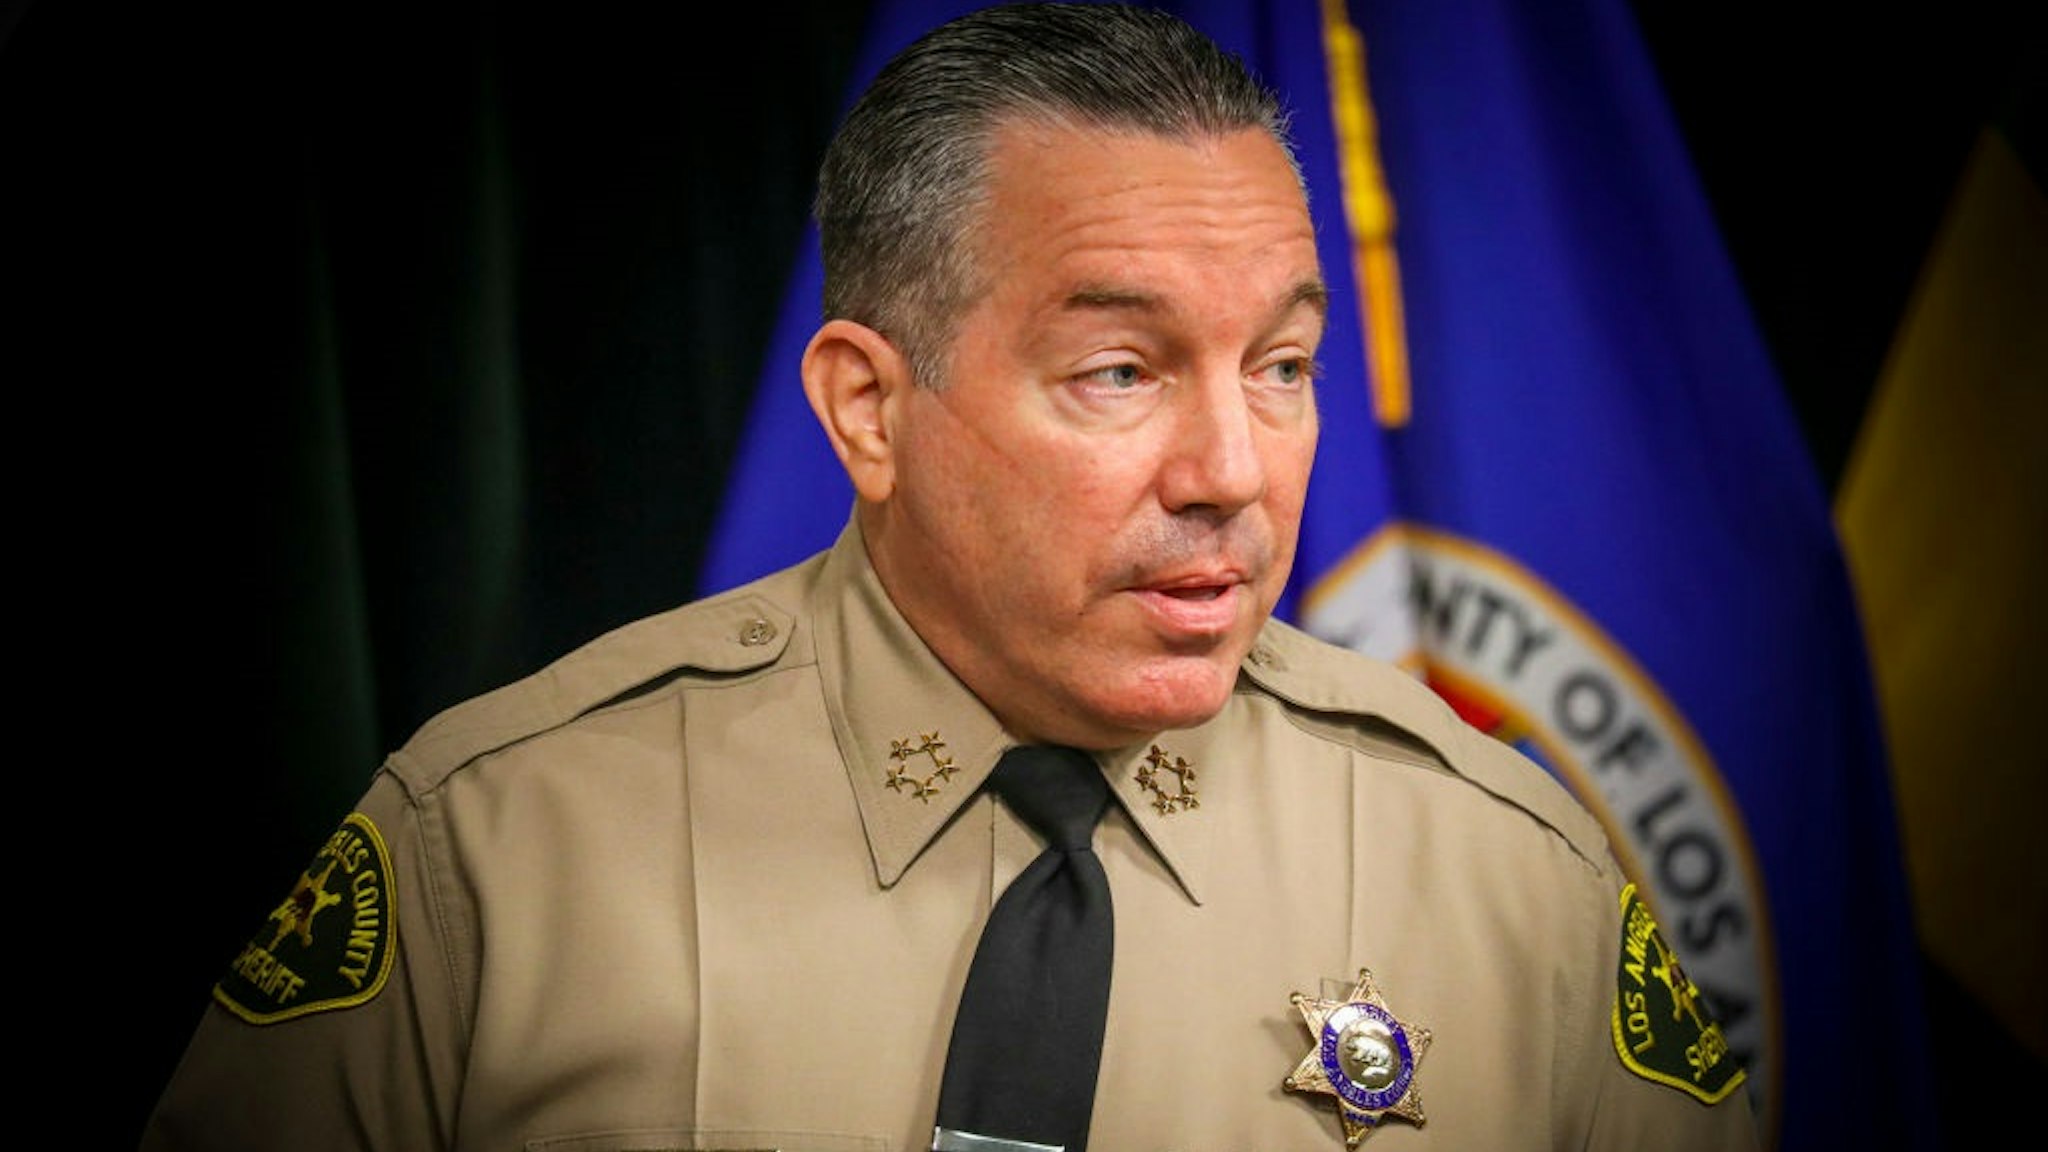 LOS ANGELES, CA - AUGUST 12: Sheriff Alex Villanueva speaks at a news conference to give an update on the fatal shooting by a deputy of Andres Guardado on June 18 near Gardena. in Hall of Justice on Wednesday, Aug. 12, 2020 in Los Angeles, CA.